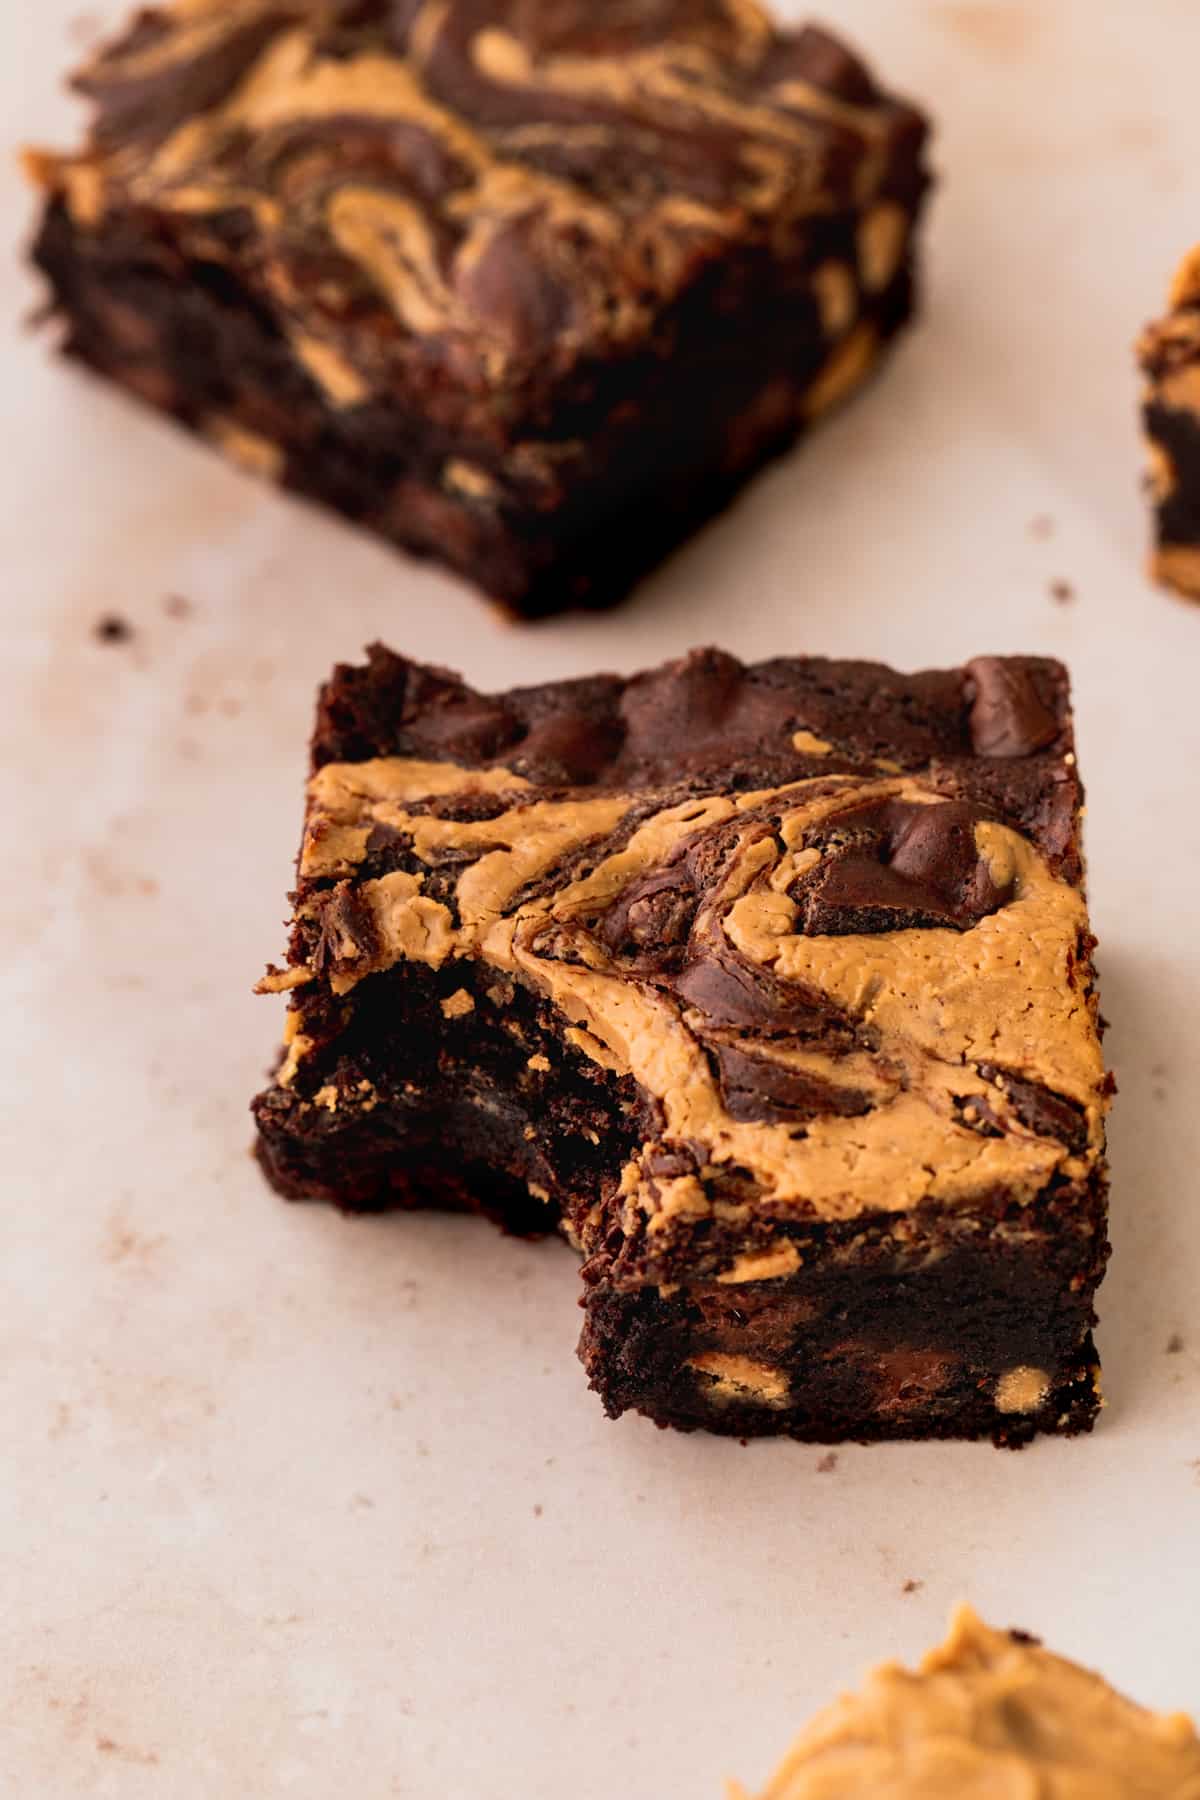 Chocolate peanut butter brownie with a bite missing.